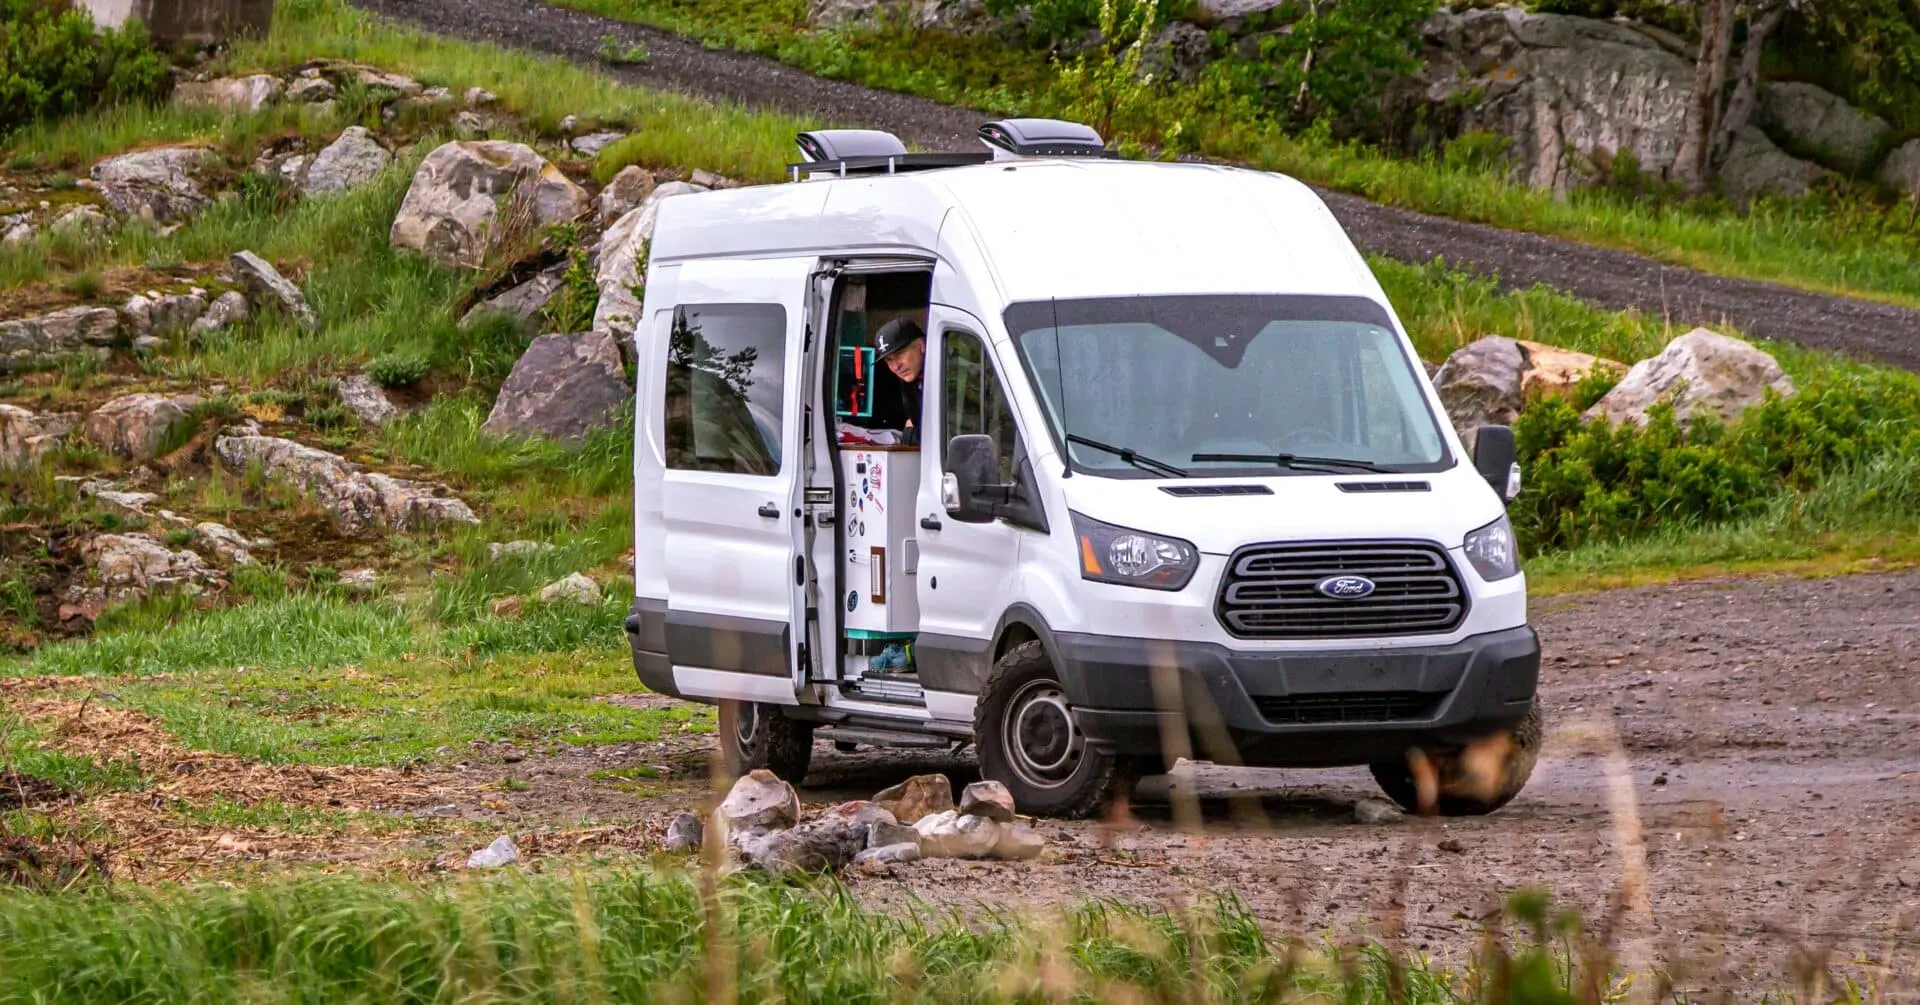 Class B RV - one of the smallest self-contained RVs